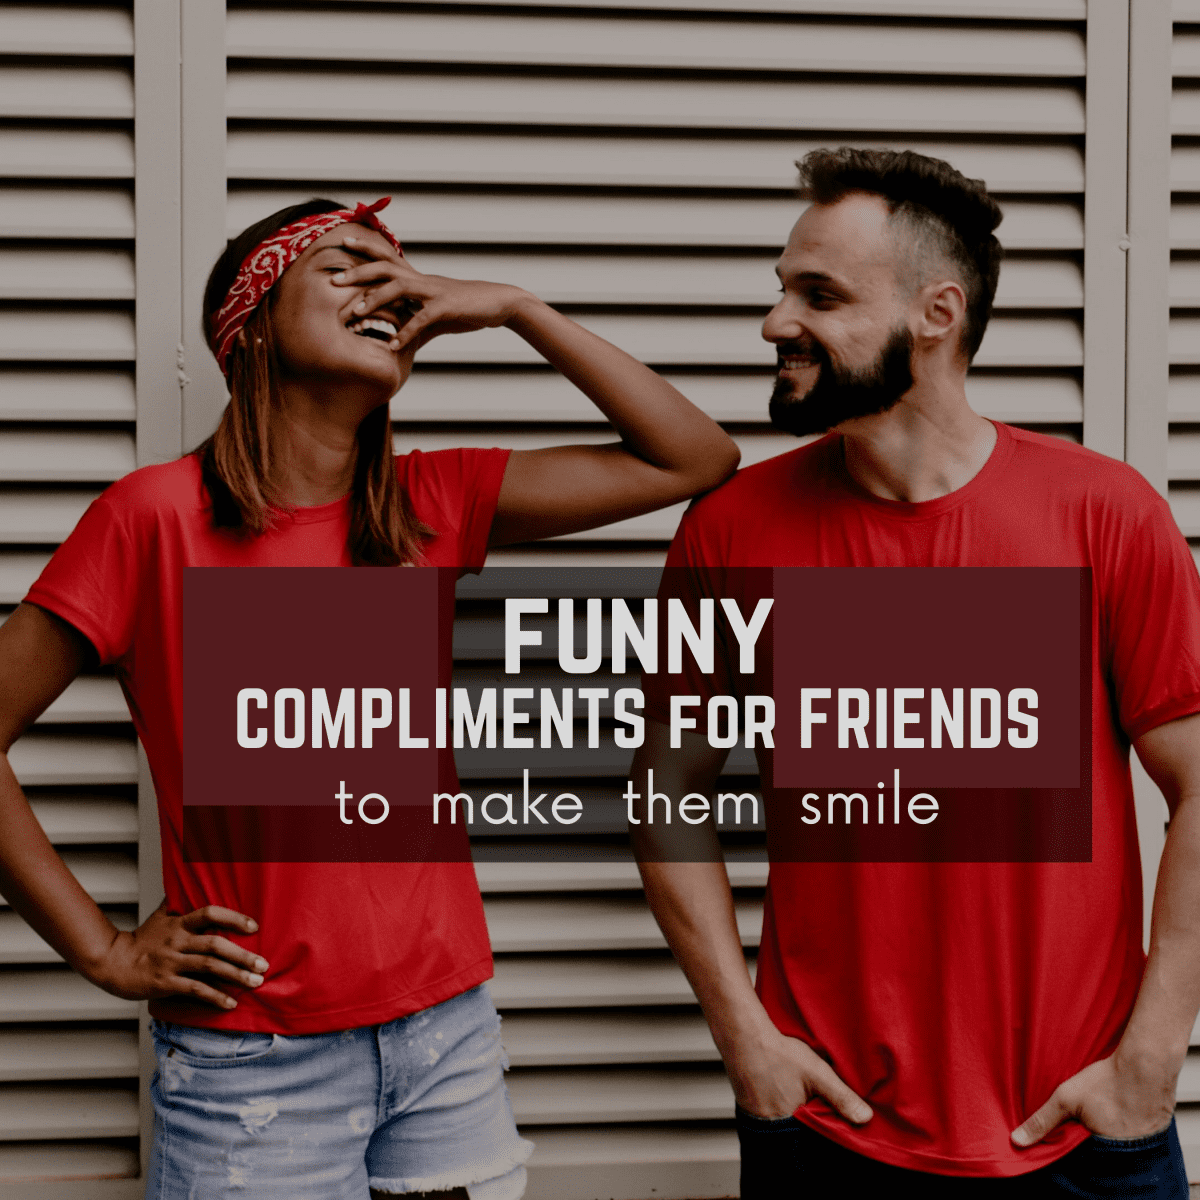 100+ Funny Compliments for Friends - PairedLife